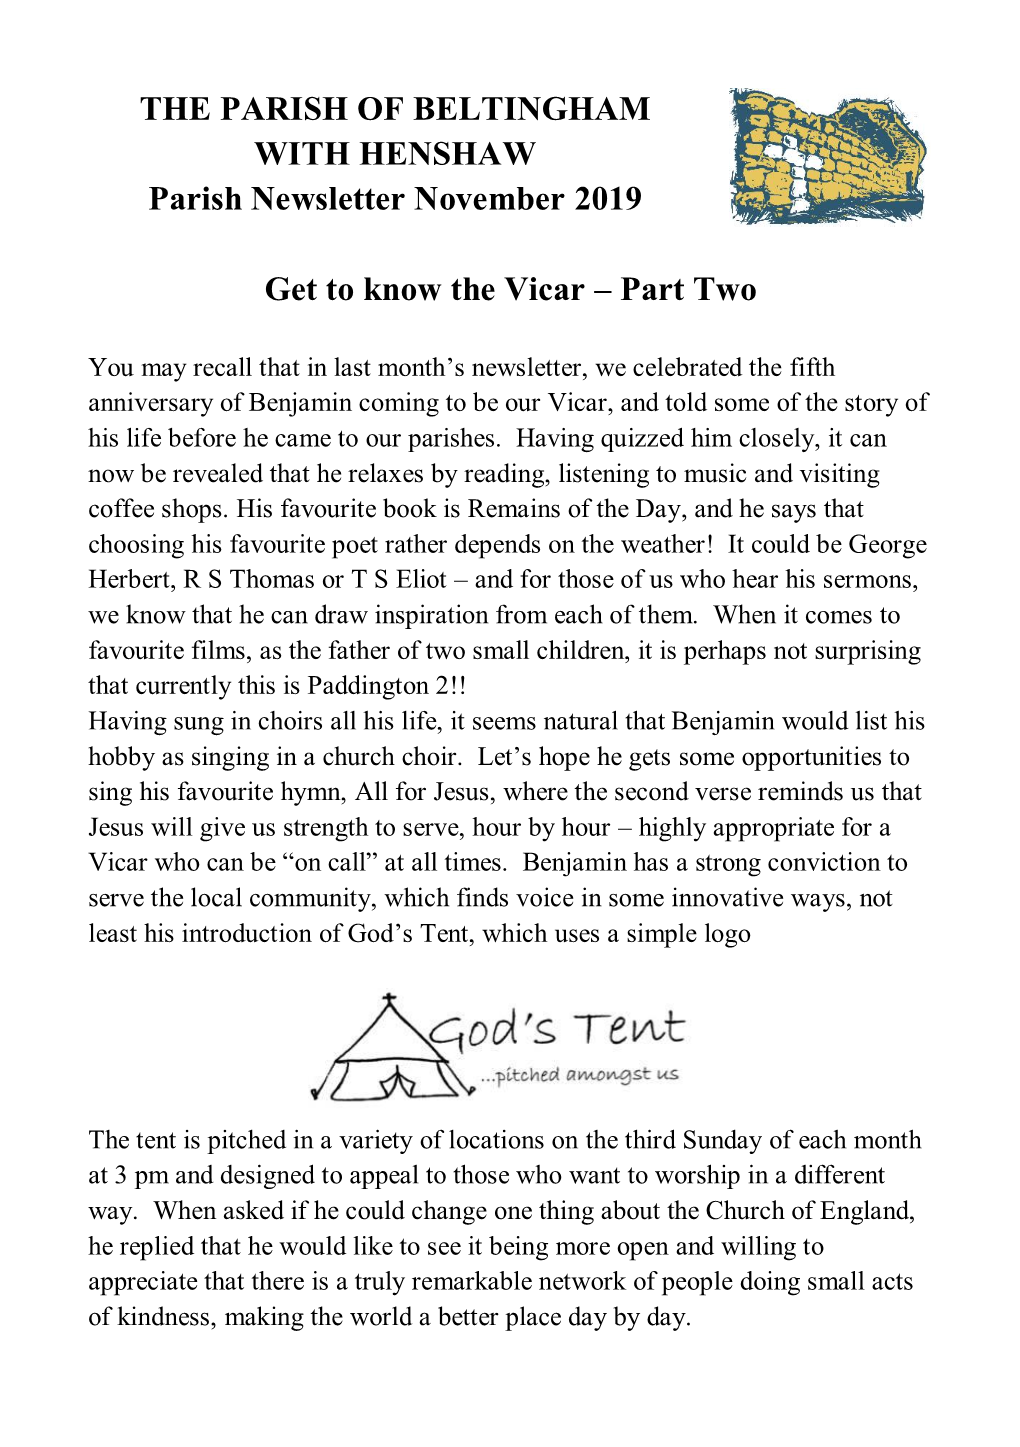 THE PARISH of BELTINGHAM with HENSHAW Parish Newsletter November 2019 Get to Know the Vicar – Part